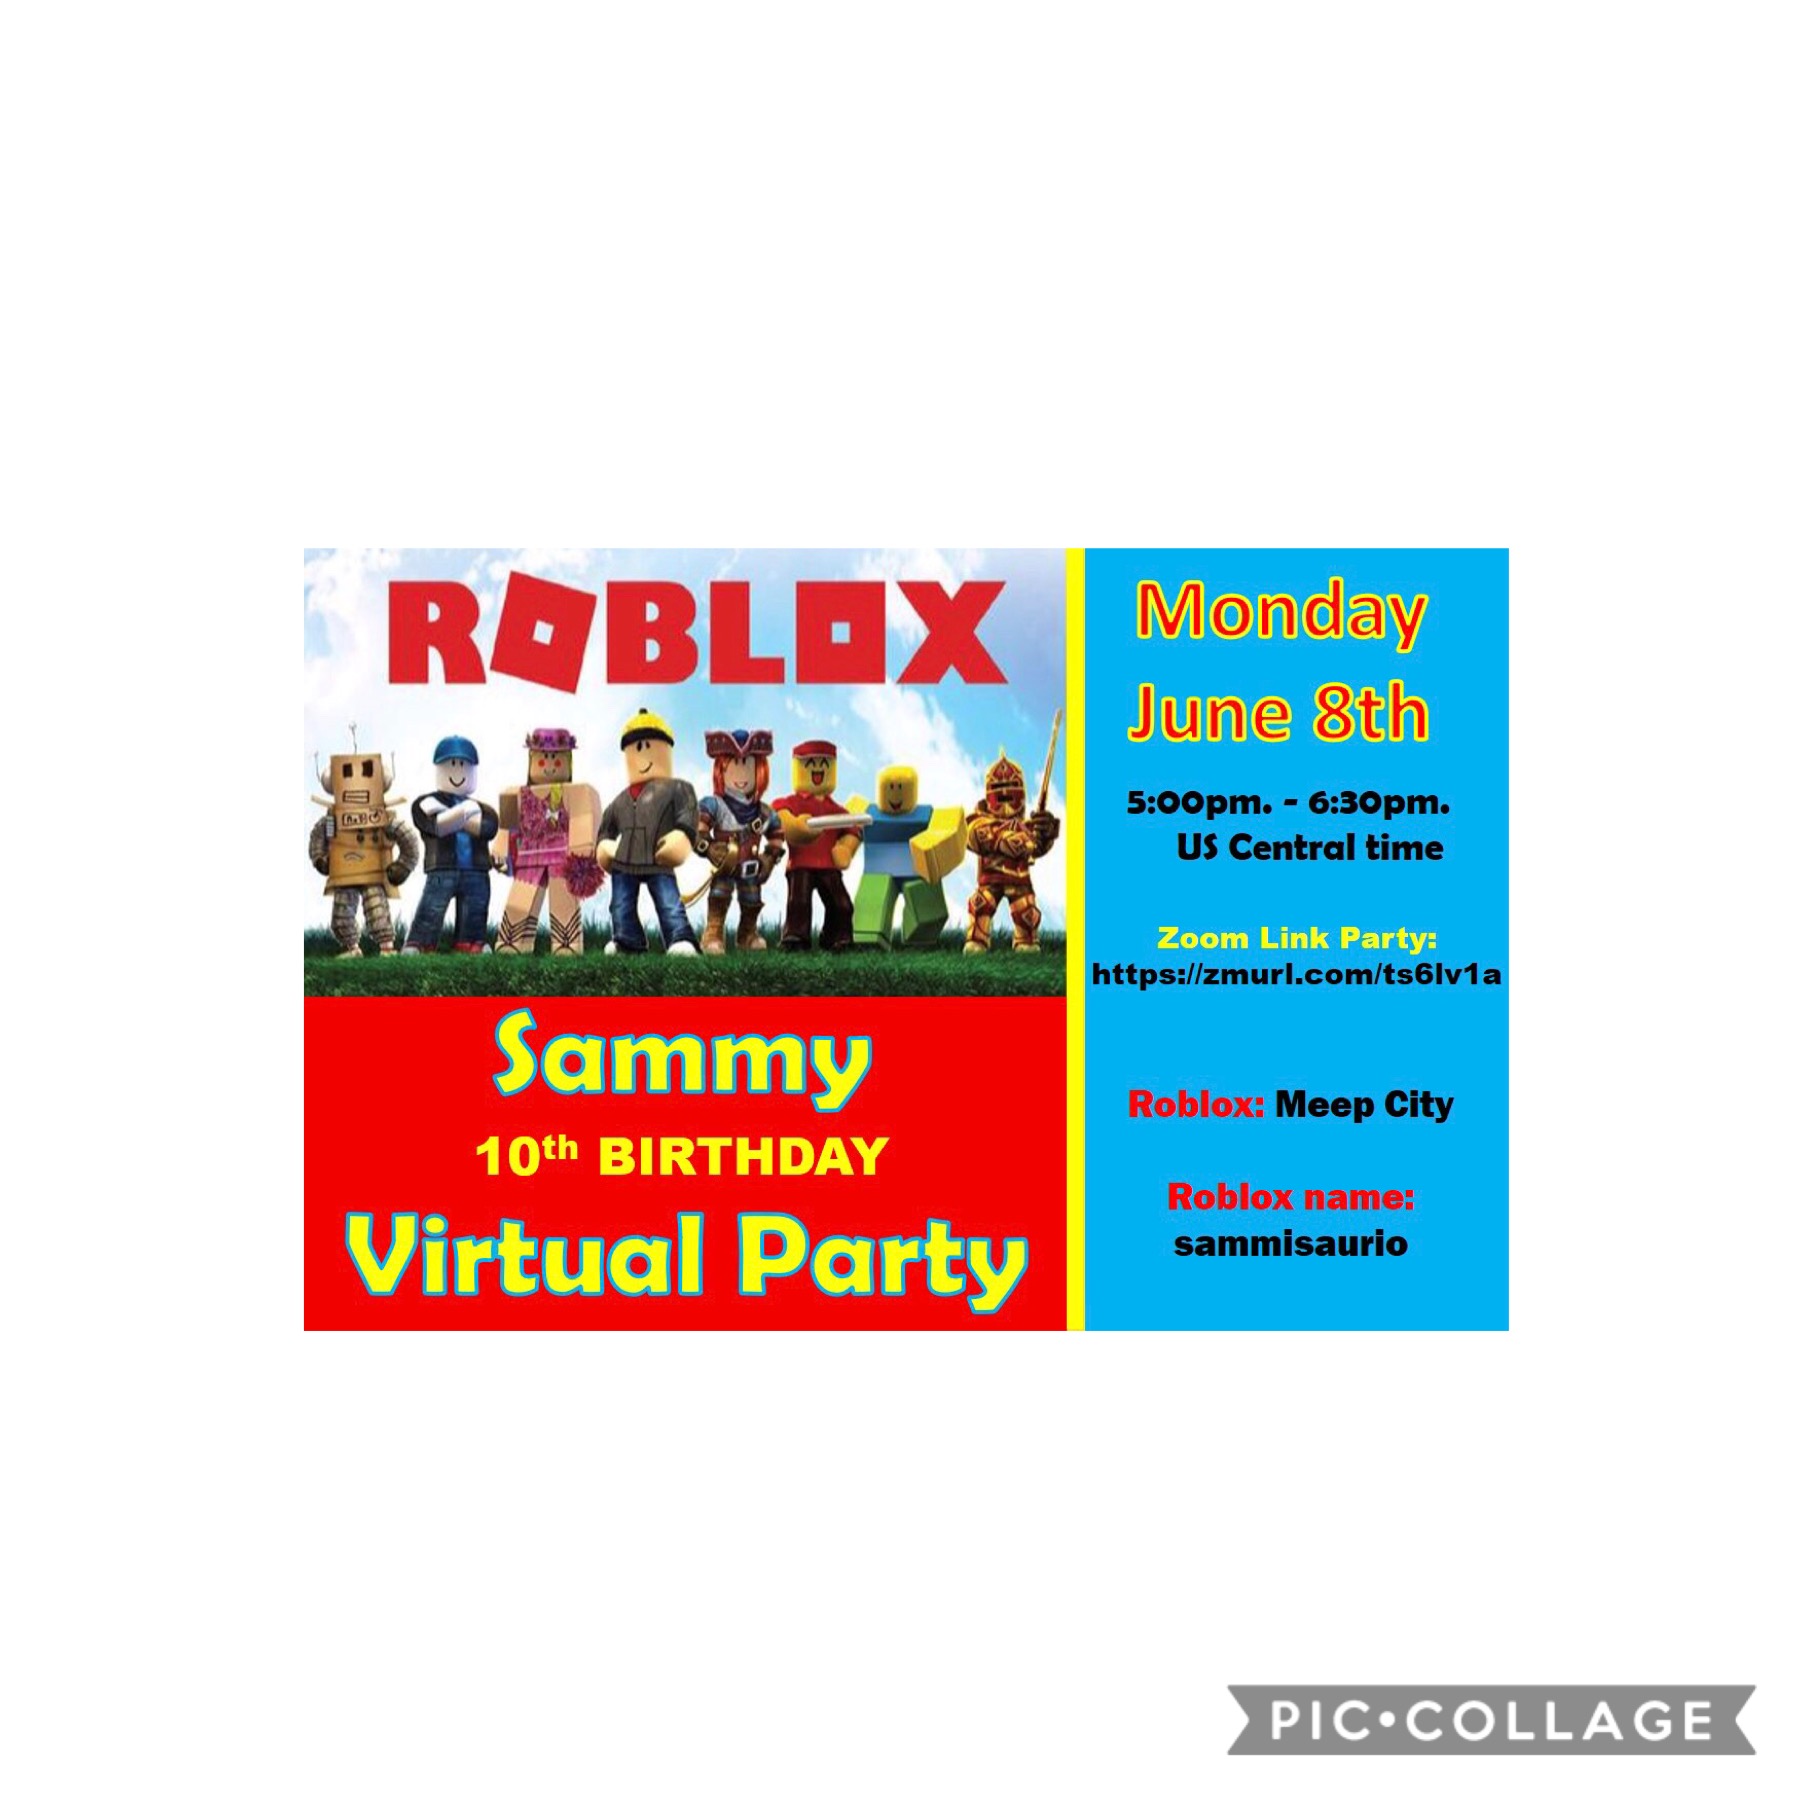 Sammy S 10 Birthday Party Luma - joining a party to party meep city in roblox